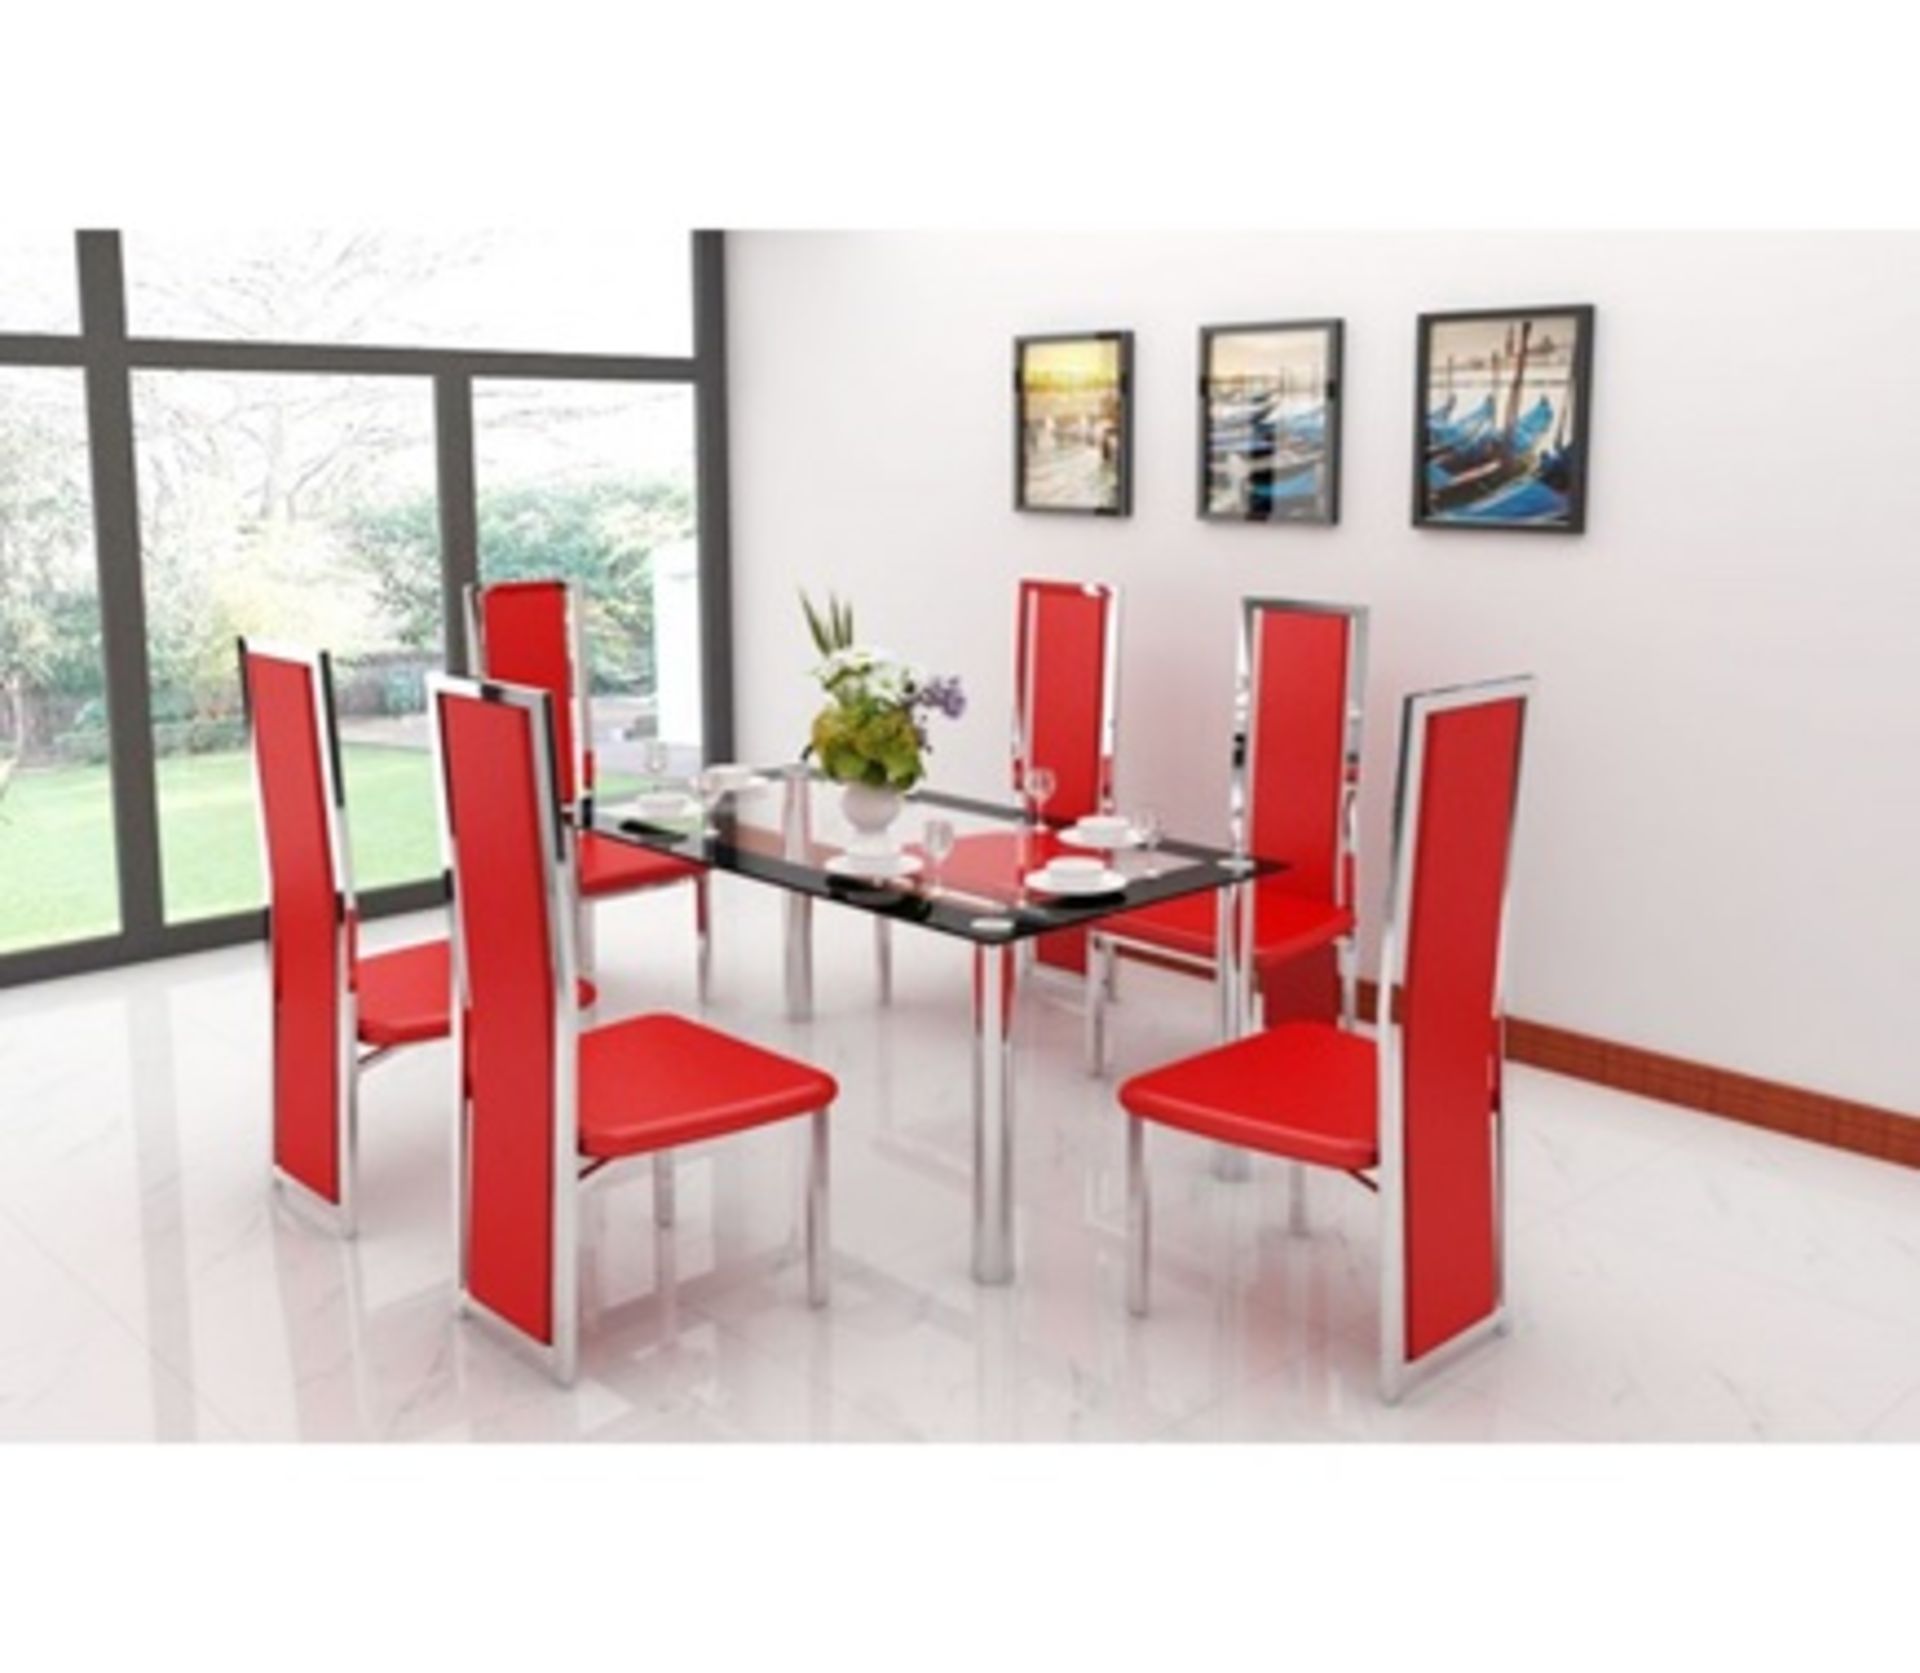 1 BRAND NEW BOXED RECTANGULAR CLEAR GLASS AND CHROME DINING TABLE WITH 6 RED FAUX LEATHER HIGHBACK